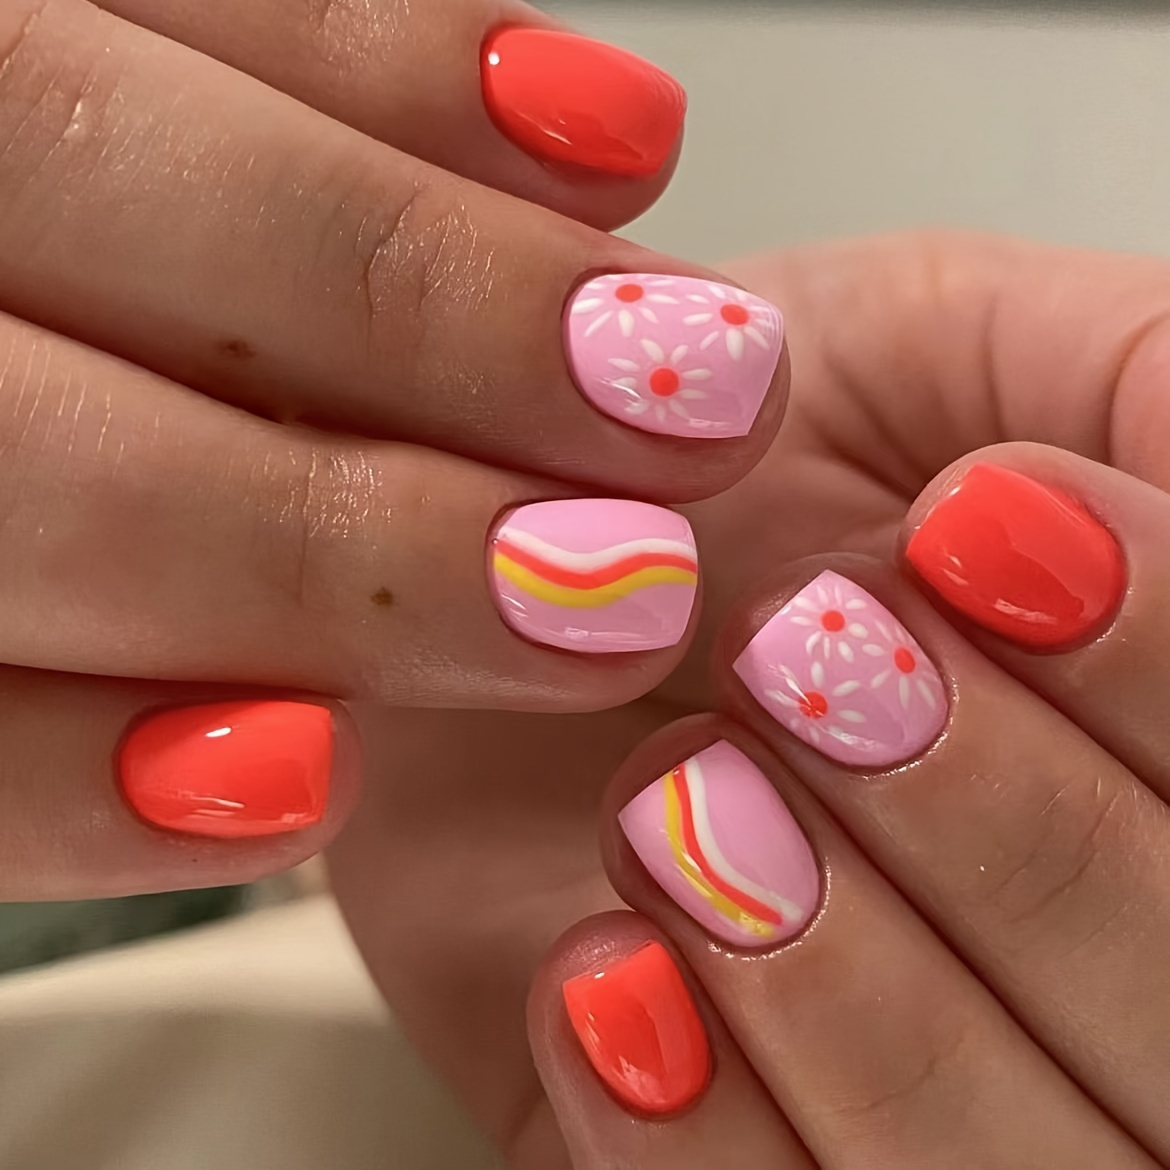 46 Cute Acrylic Nail Designs You'll Want to Try Today | Vernis à ongles,  Idées vernis à ongles, Jolis ongles